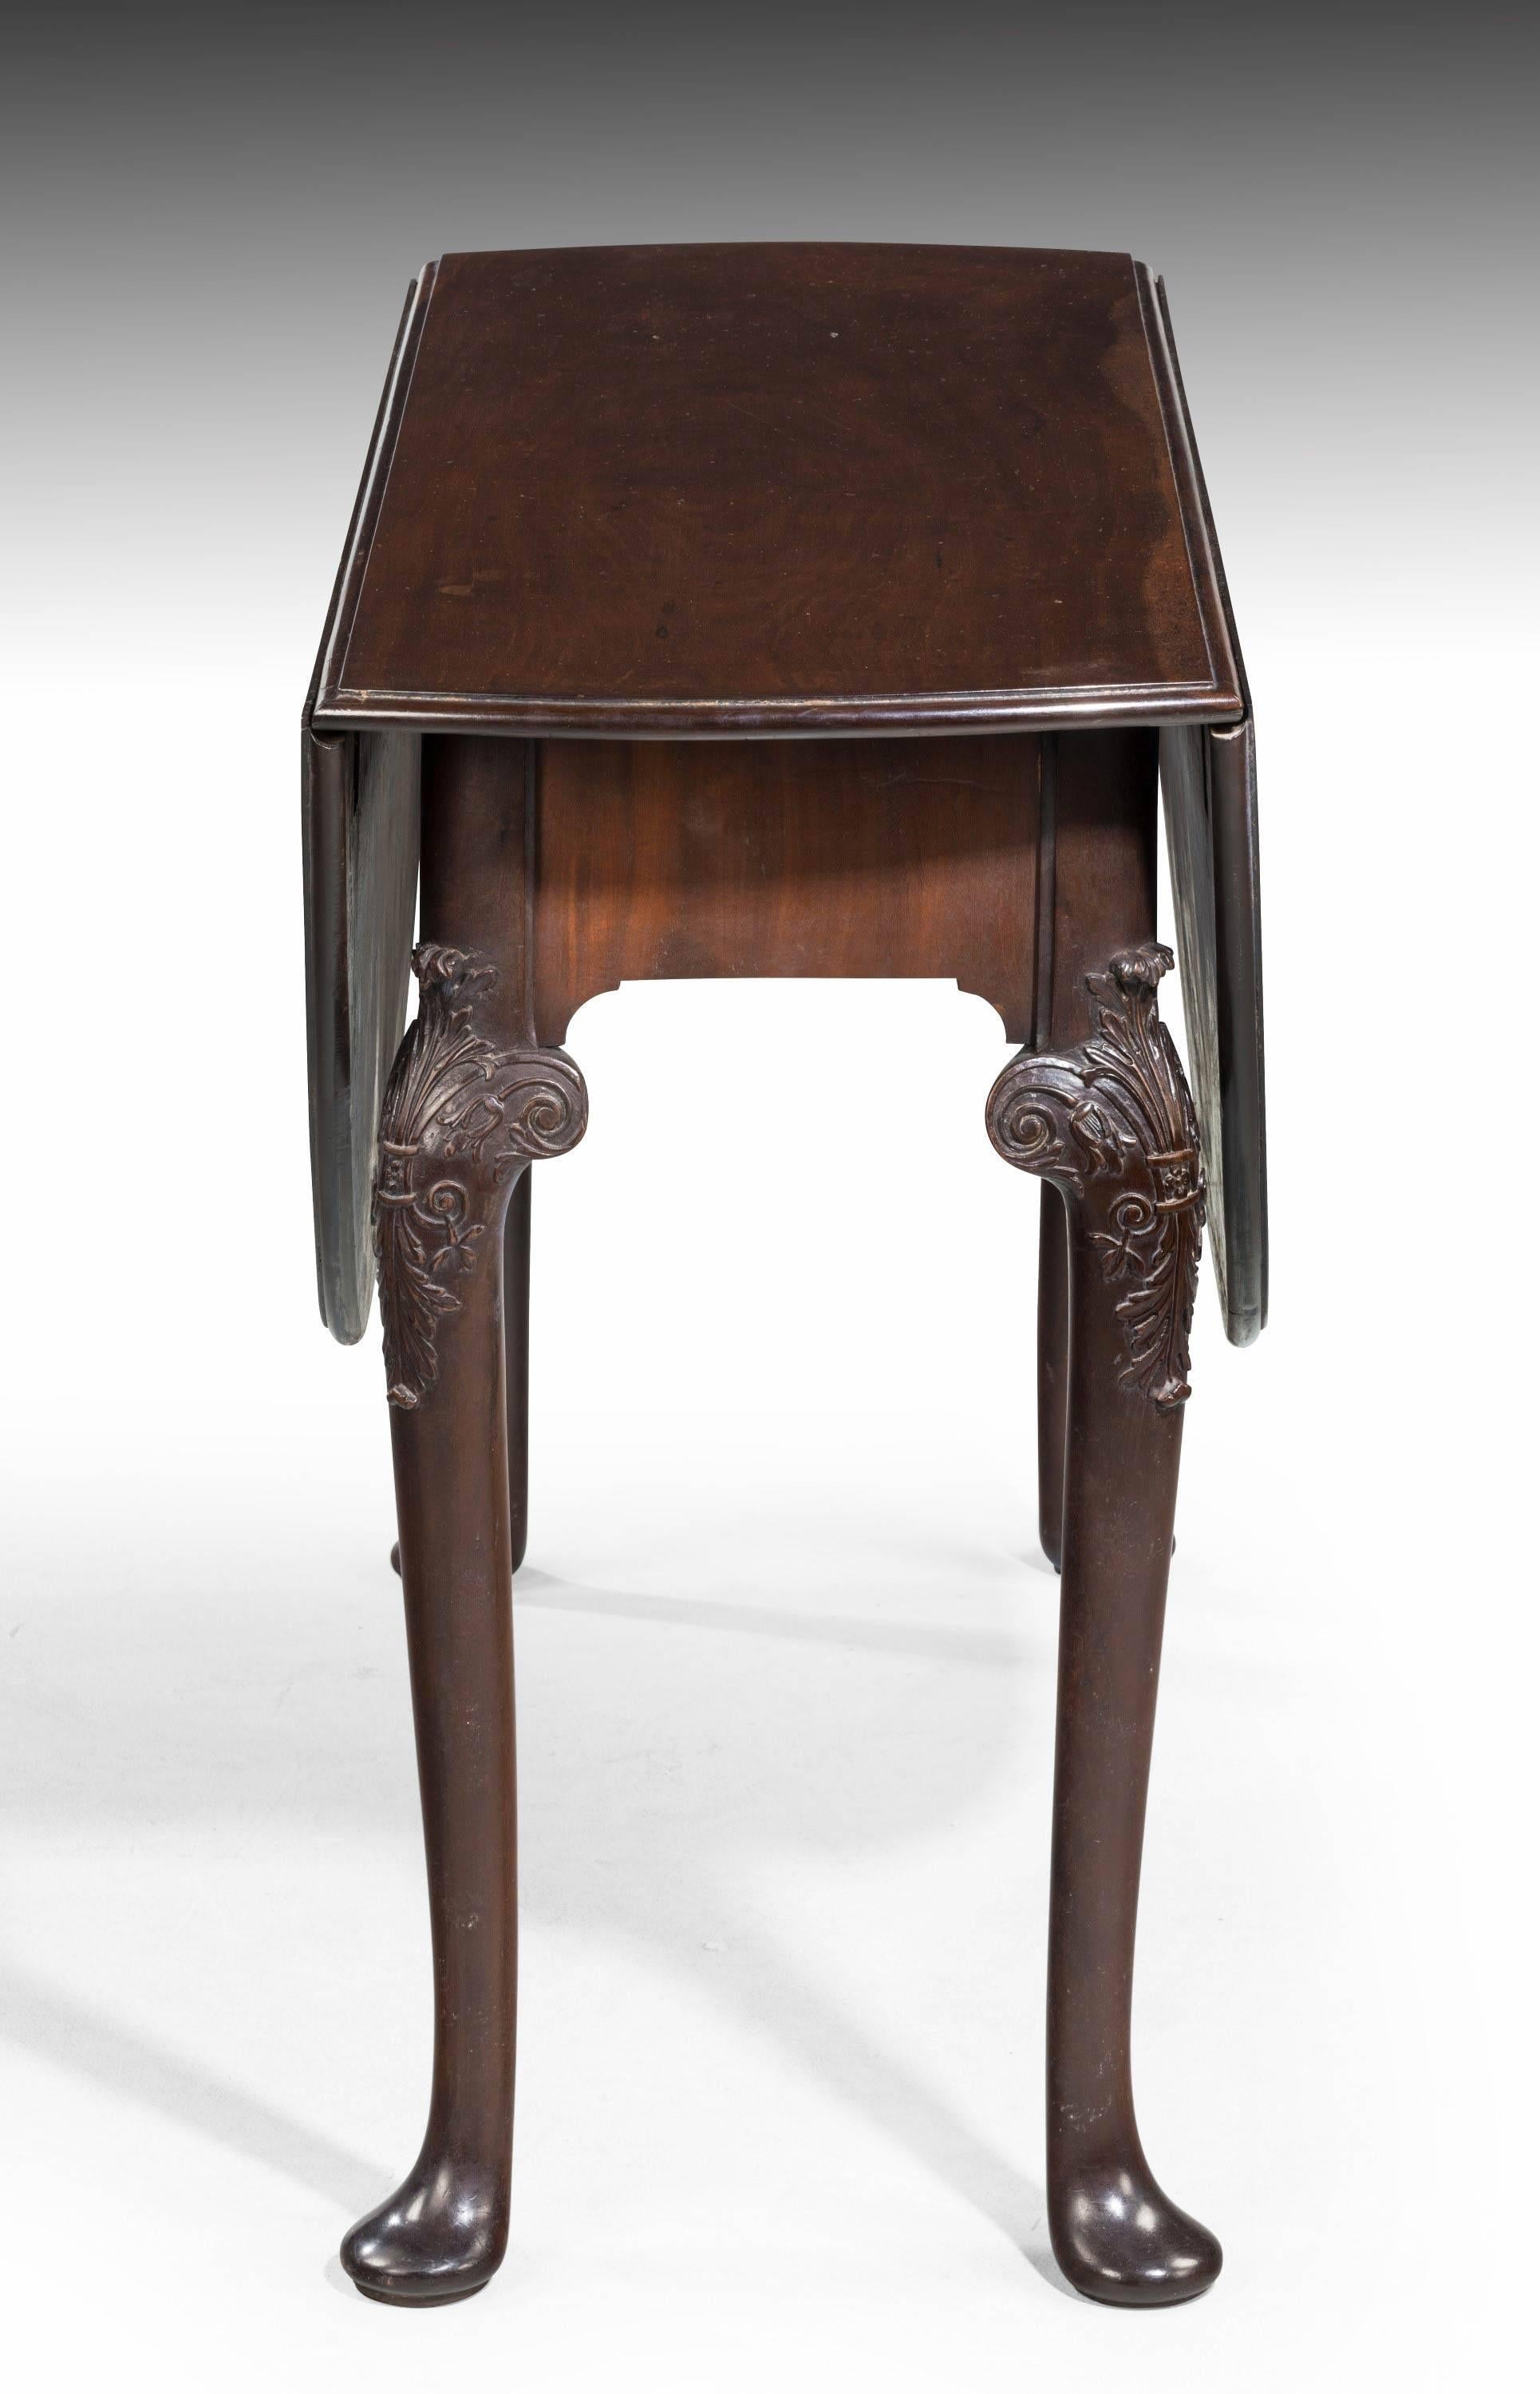 English Mid-18th Century Mahogany Oval Drop Leaf Table with Beautifully Carved Knees For Sale